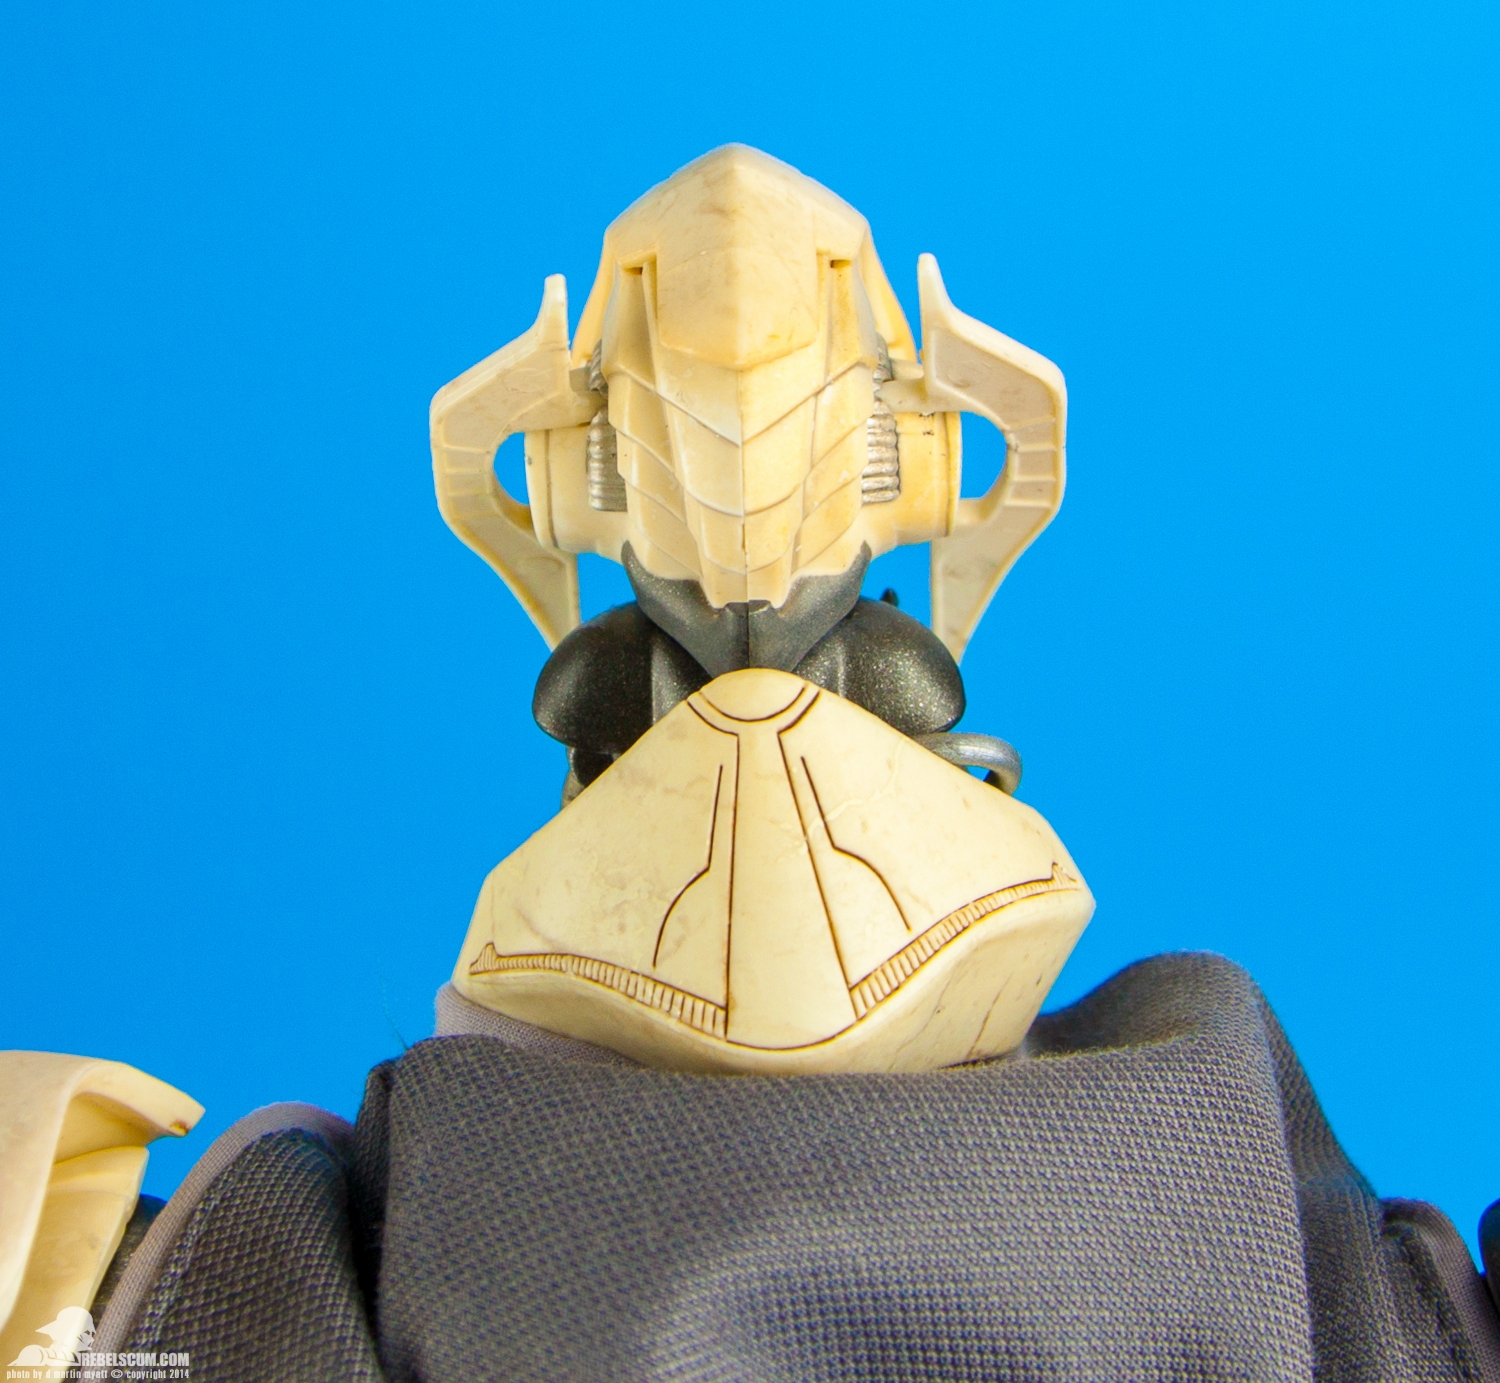 General-Grievous-Sixth-Scale-Figure-Sideshow-Collectibles-012.jpg